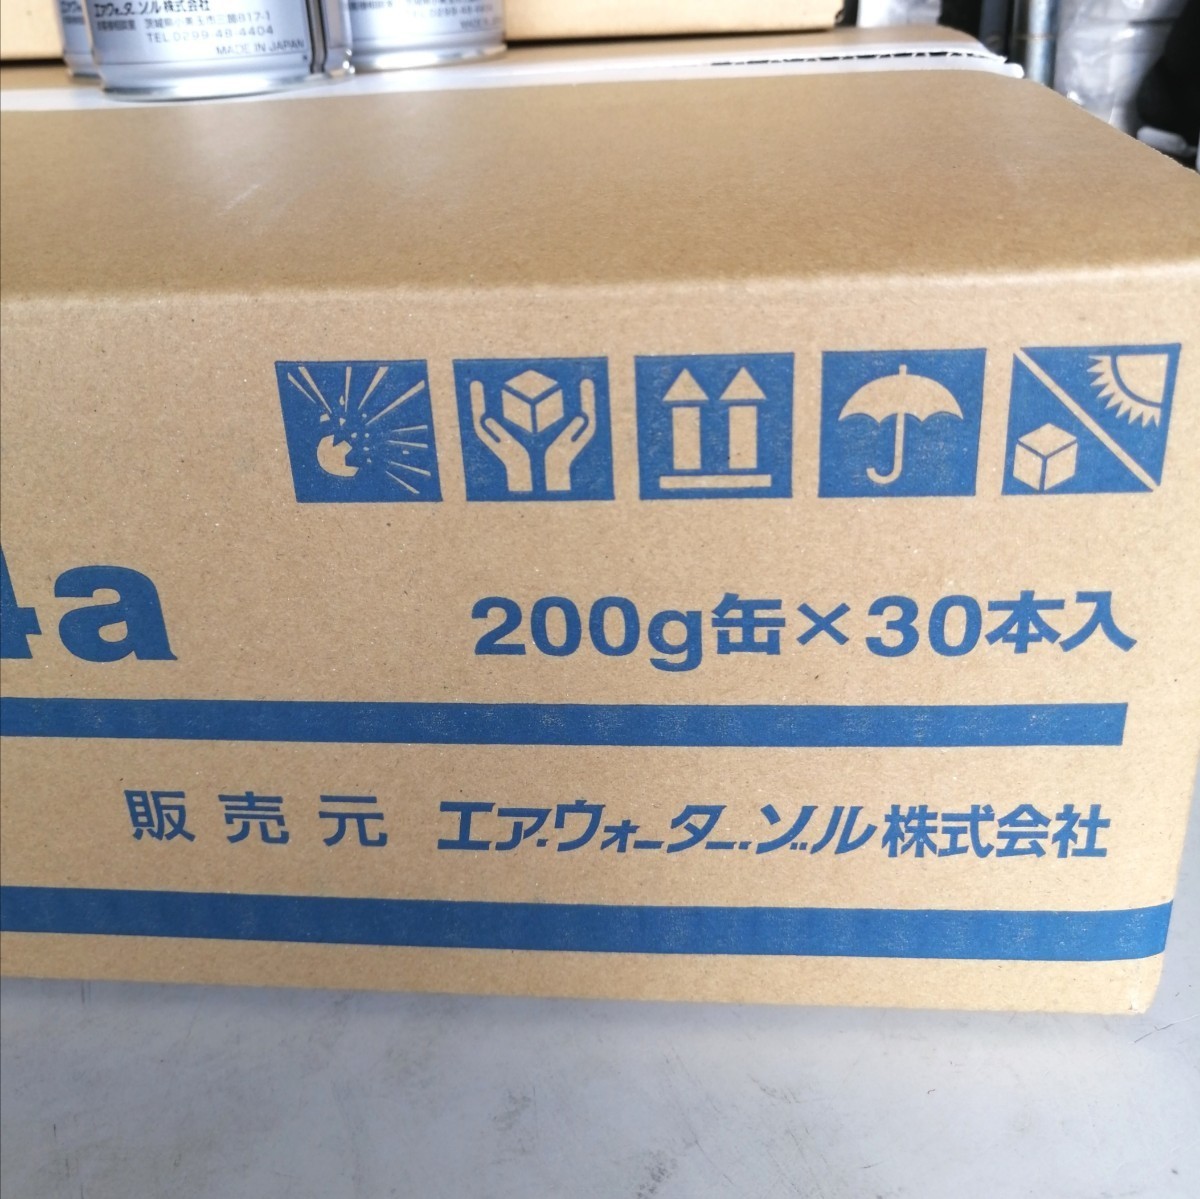 [ new goods postage included ] air water zoru/HFC-134a/ car air conditioner for cold .200g 30 pcs insertion ./1 box / Okinawa, remote island Area un- possible / made in Japan / air conditioner gas /